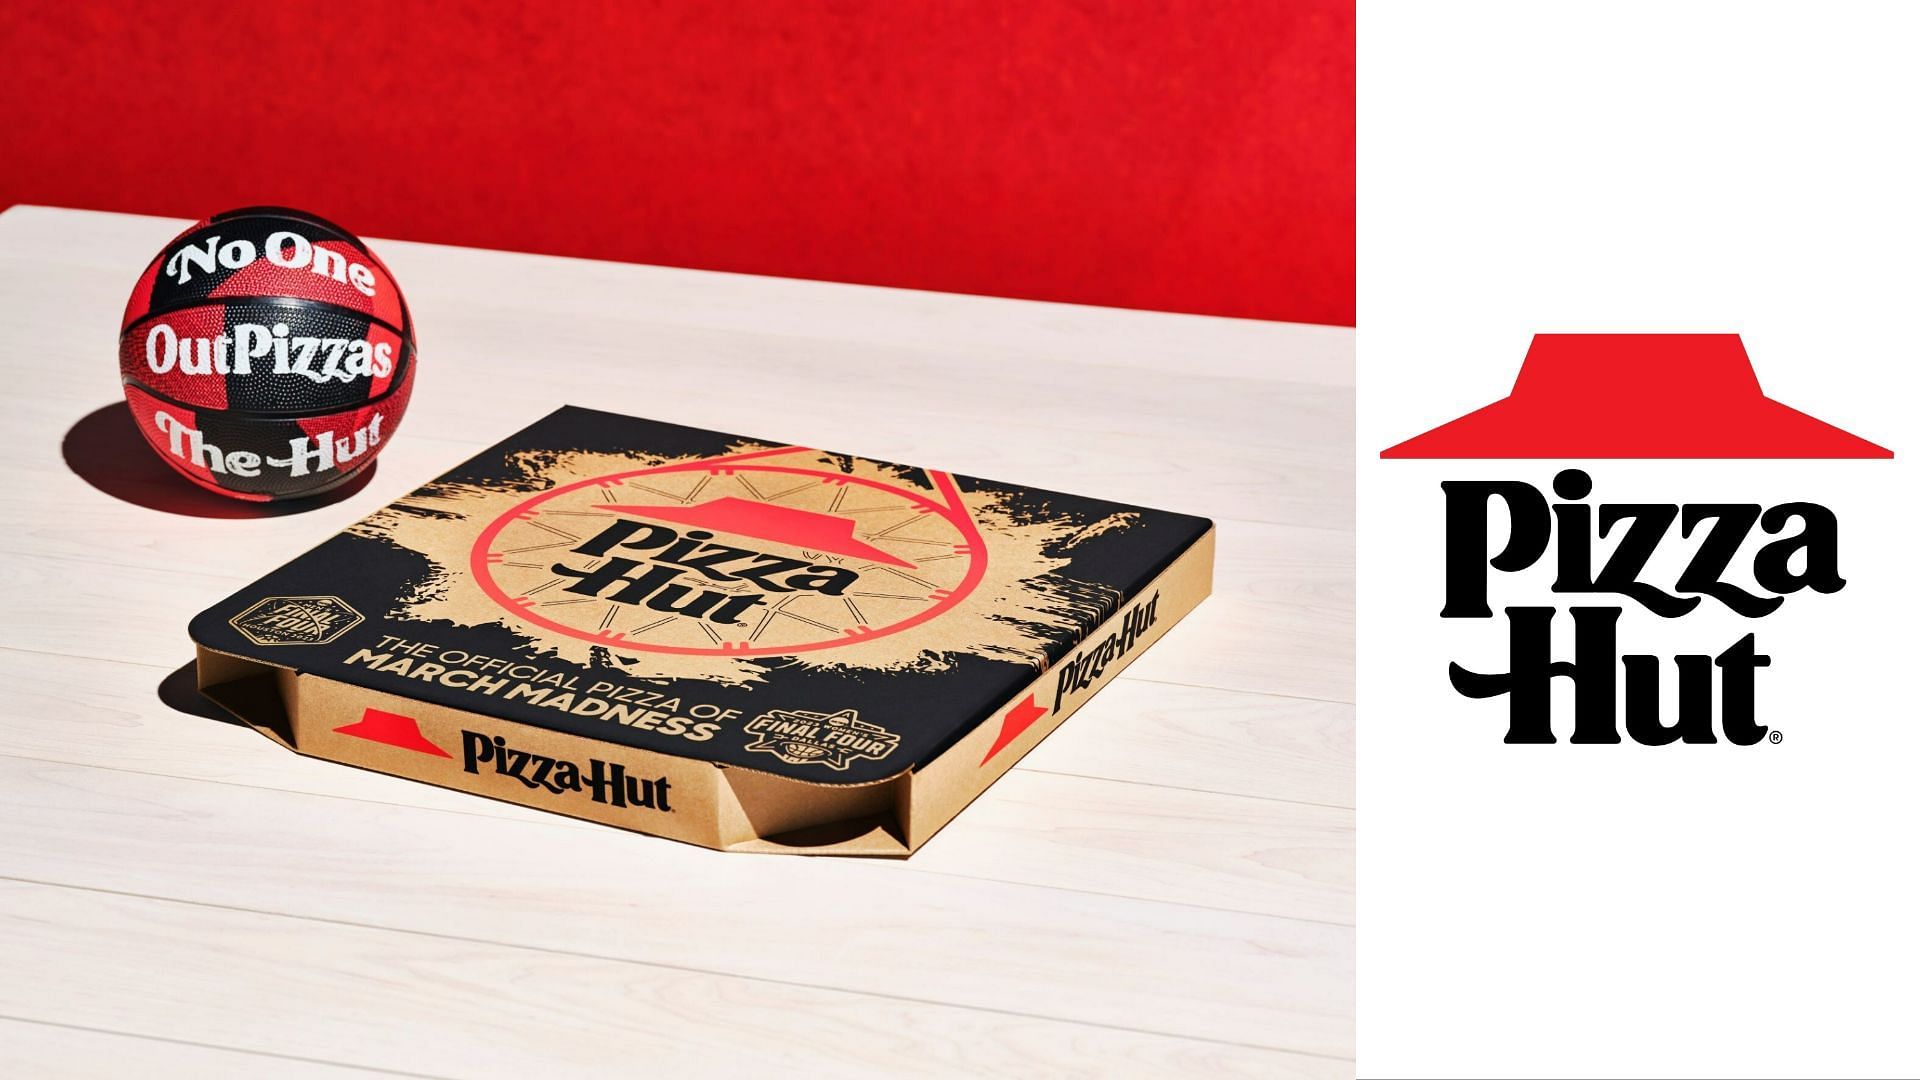 Match Madness Mini Basketballs return to the pizza chain after over three decades (Image via Pizza Hut)